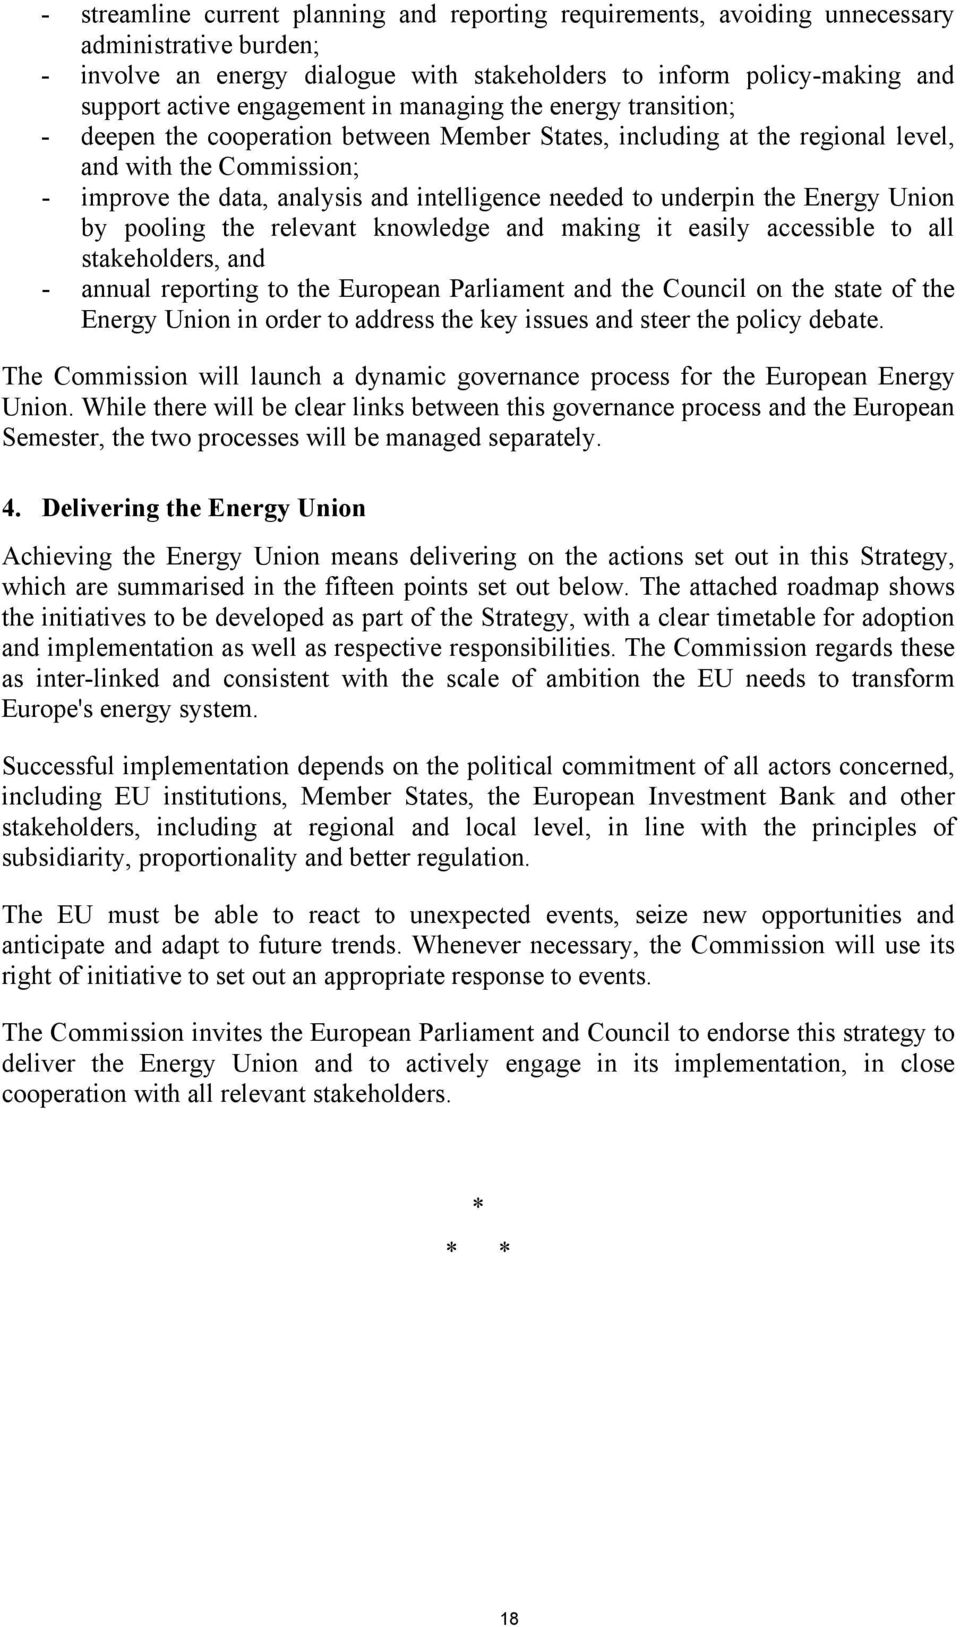 needed to underpin the Energy Union by pooling the relevant knowledge and making it easily accessible to all stakeholders, and - annual reporting to the European Parliament and the Council on the